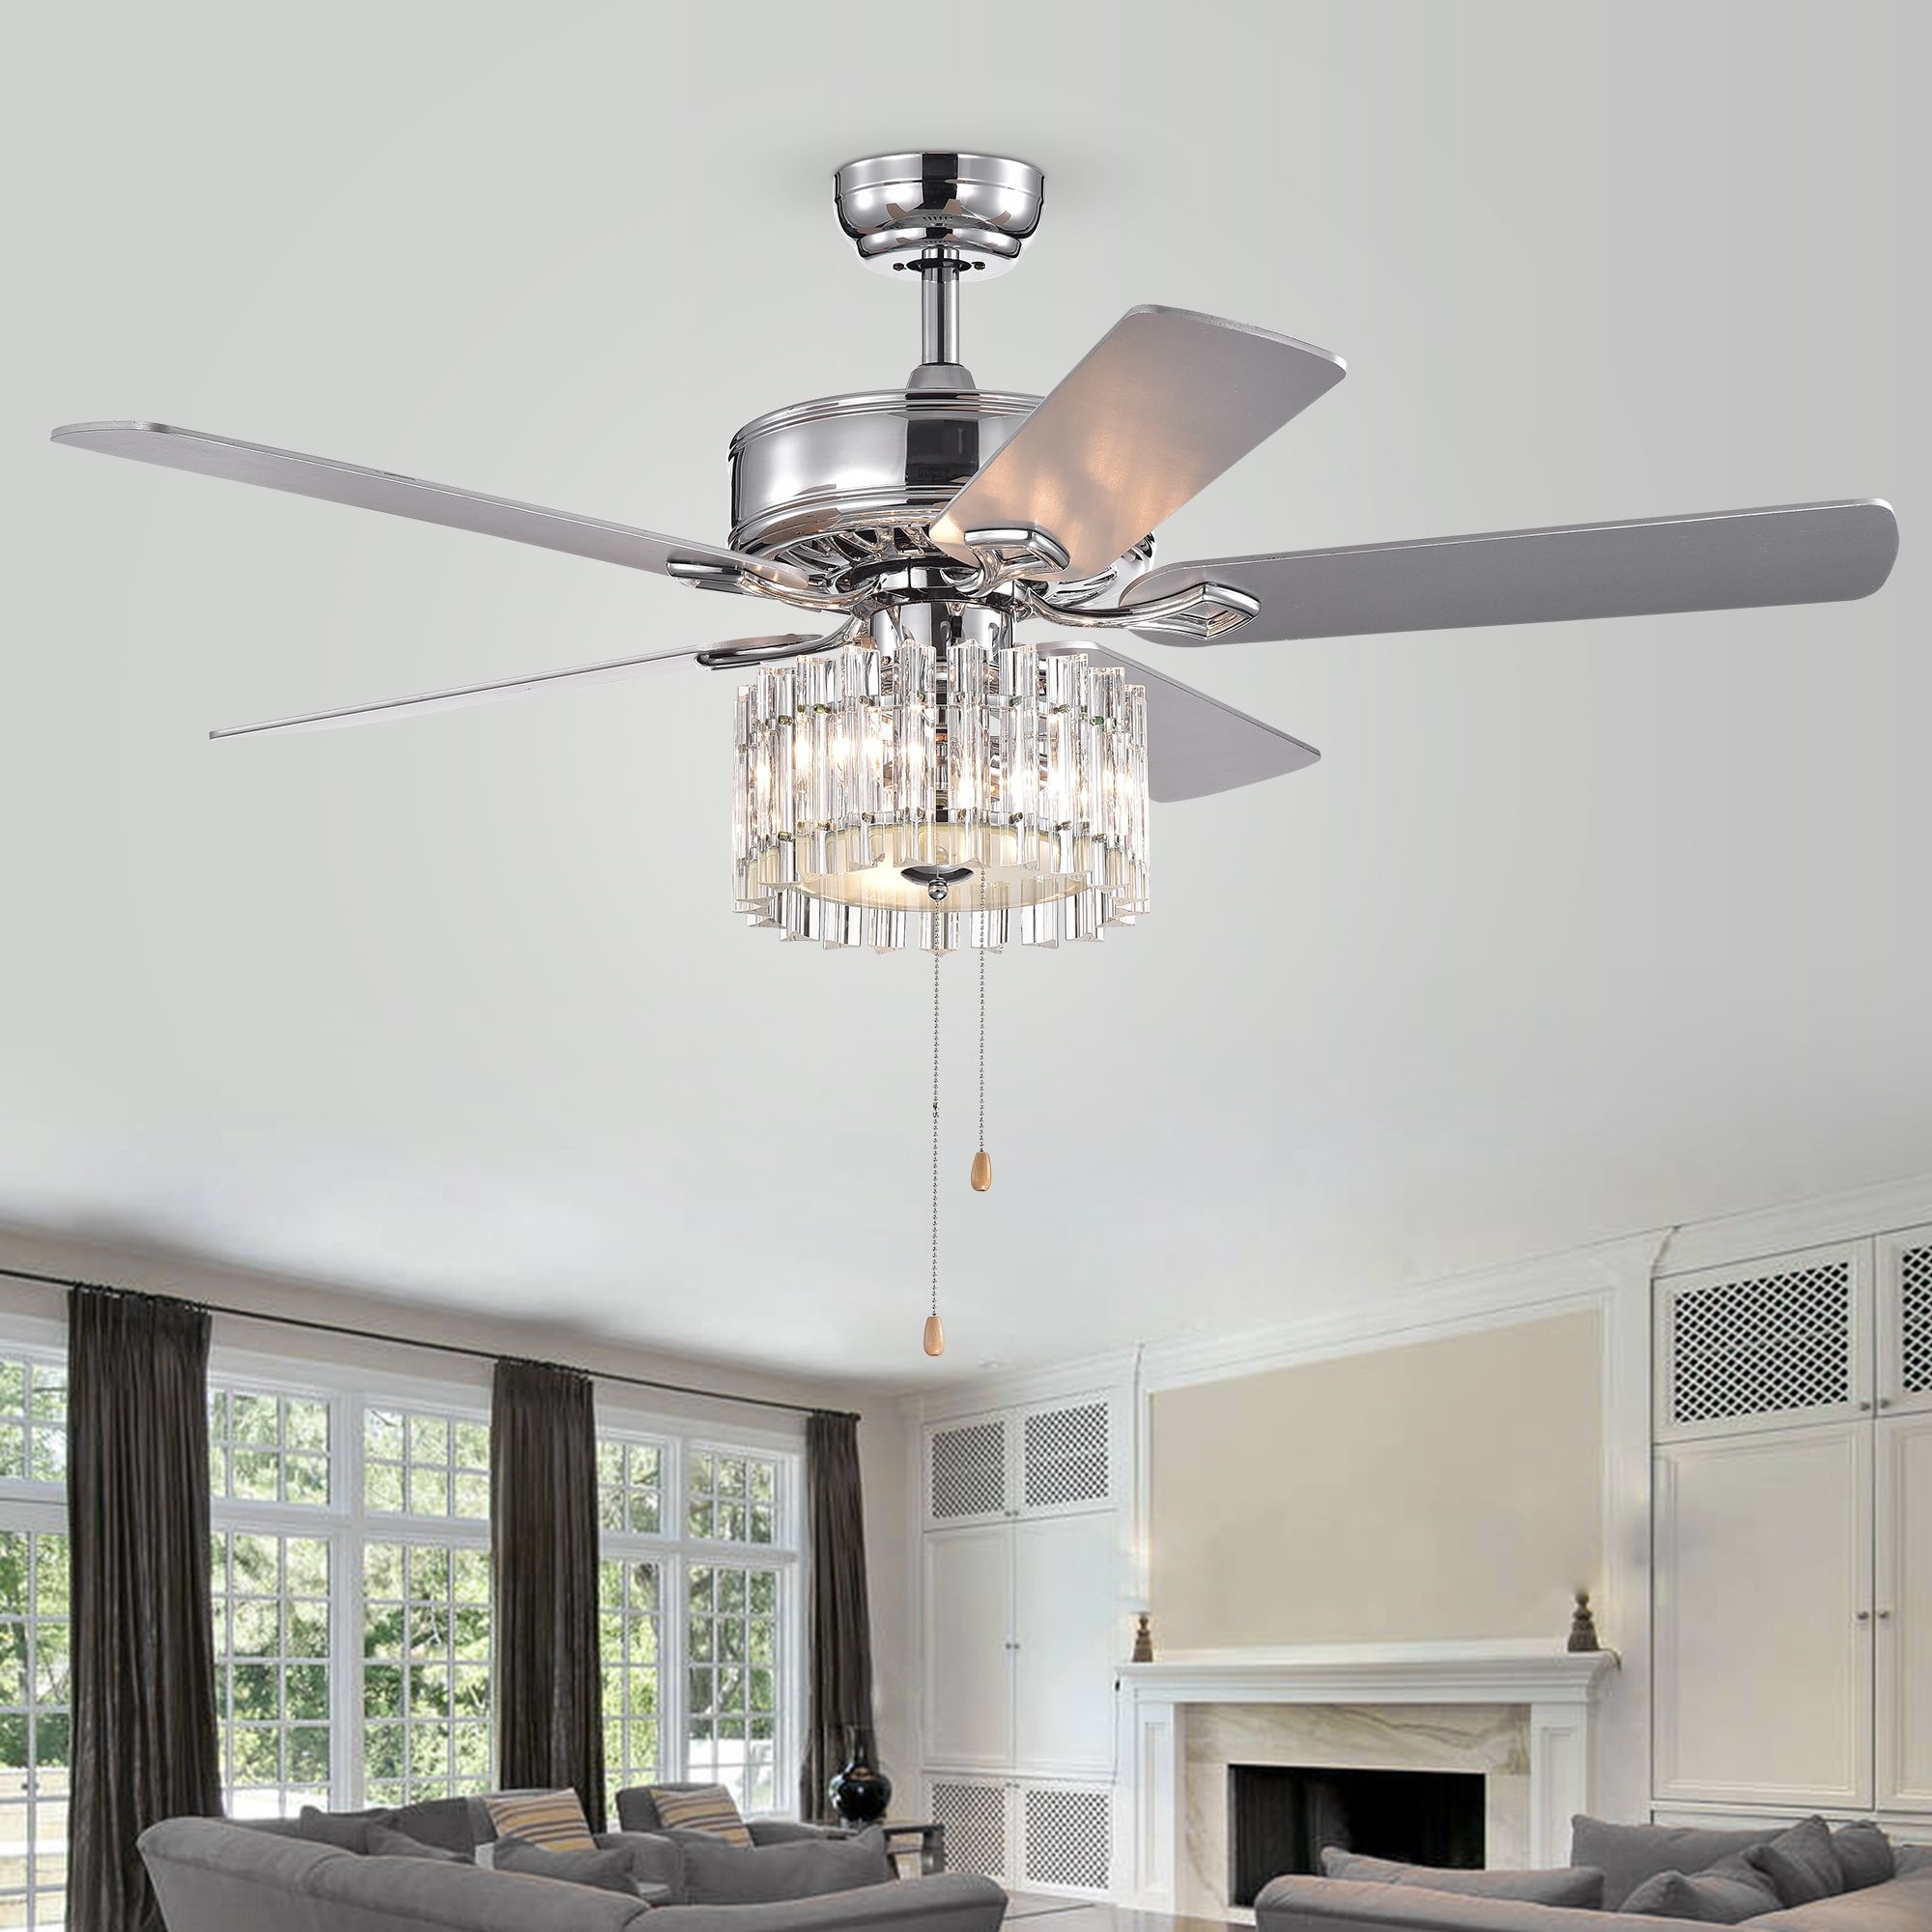 Ceiling Fan Light Jammed Lets Try To Make A Sun Light For The